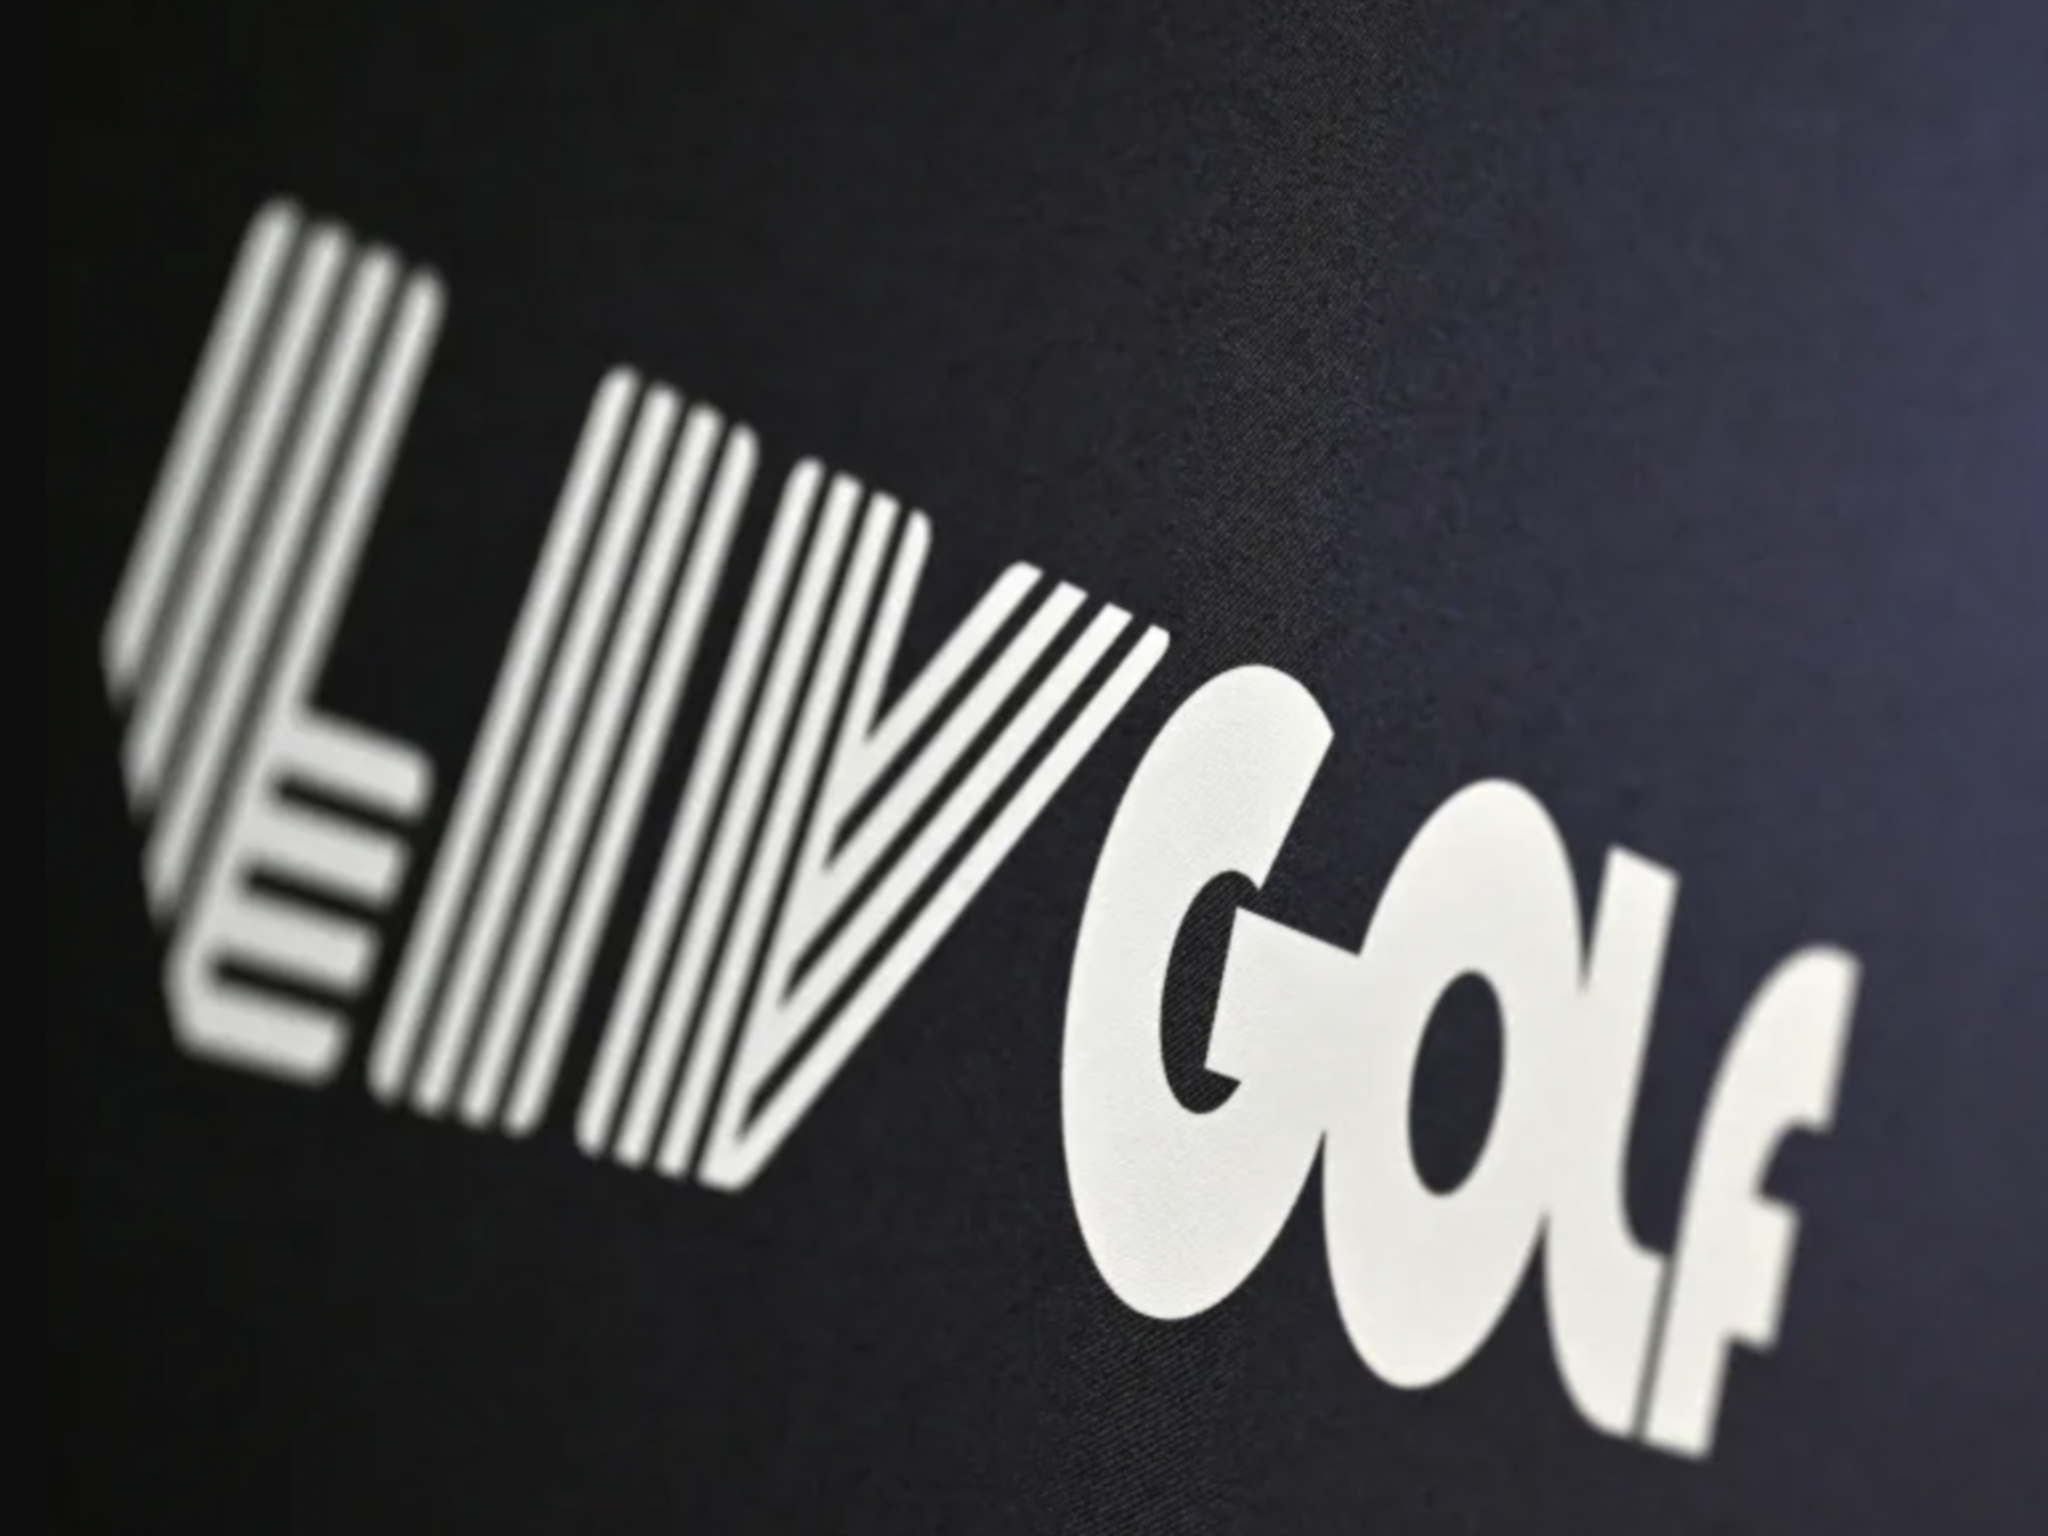 Report LIV Golfs TV viewership numbers a fraction of the numbers PGA Tour boast